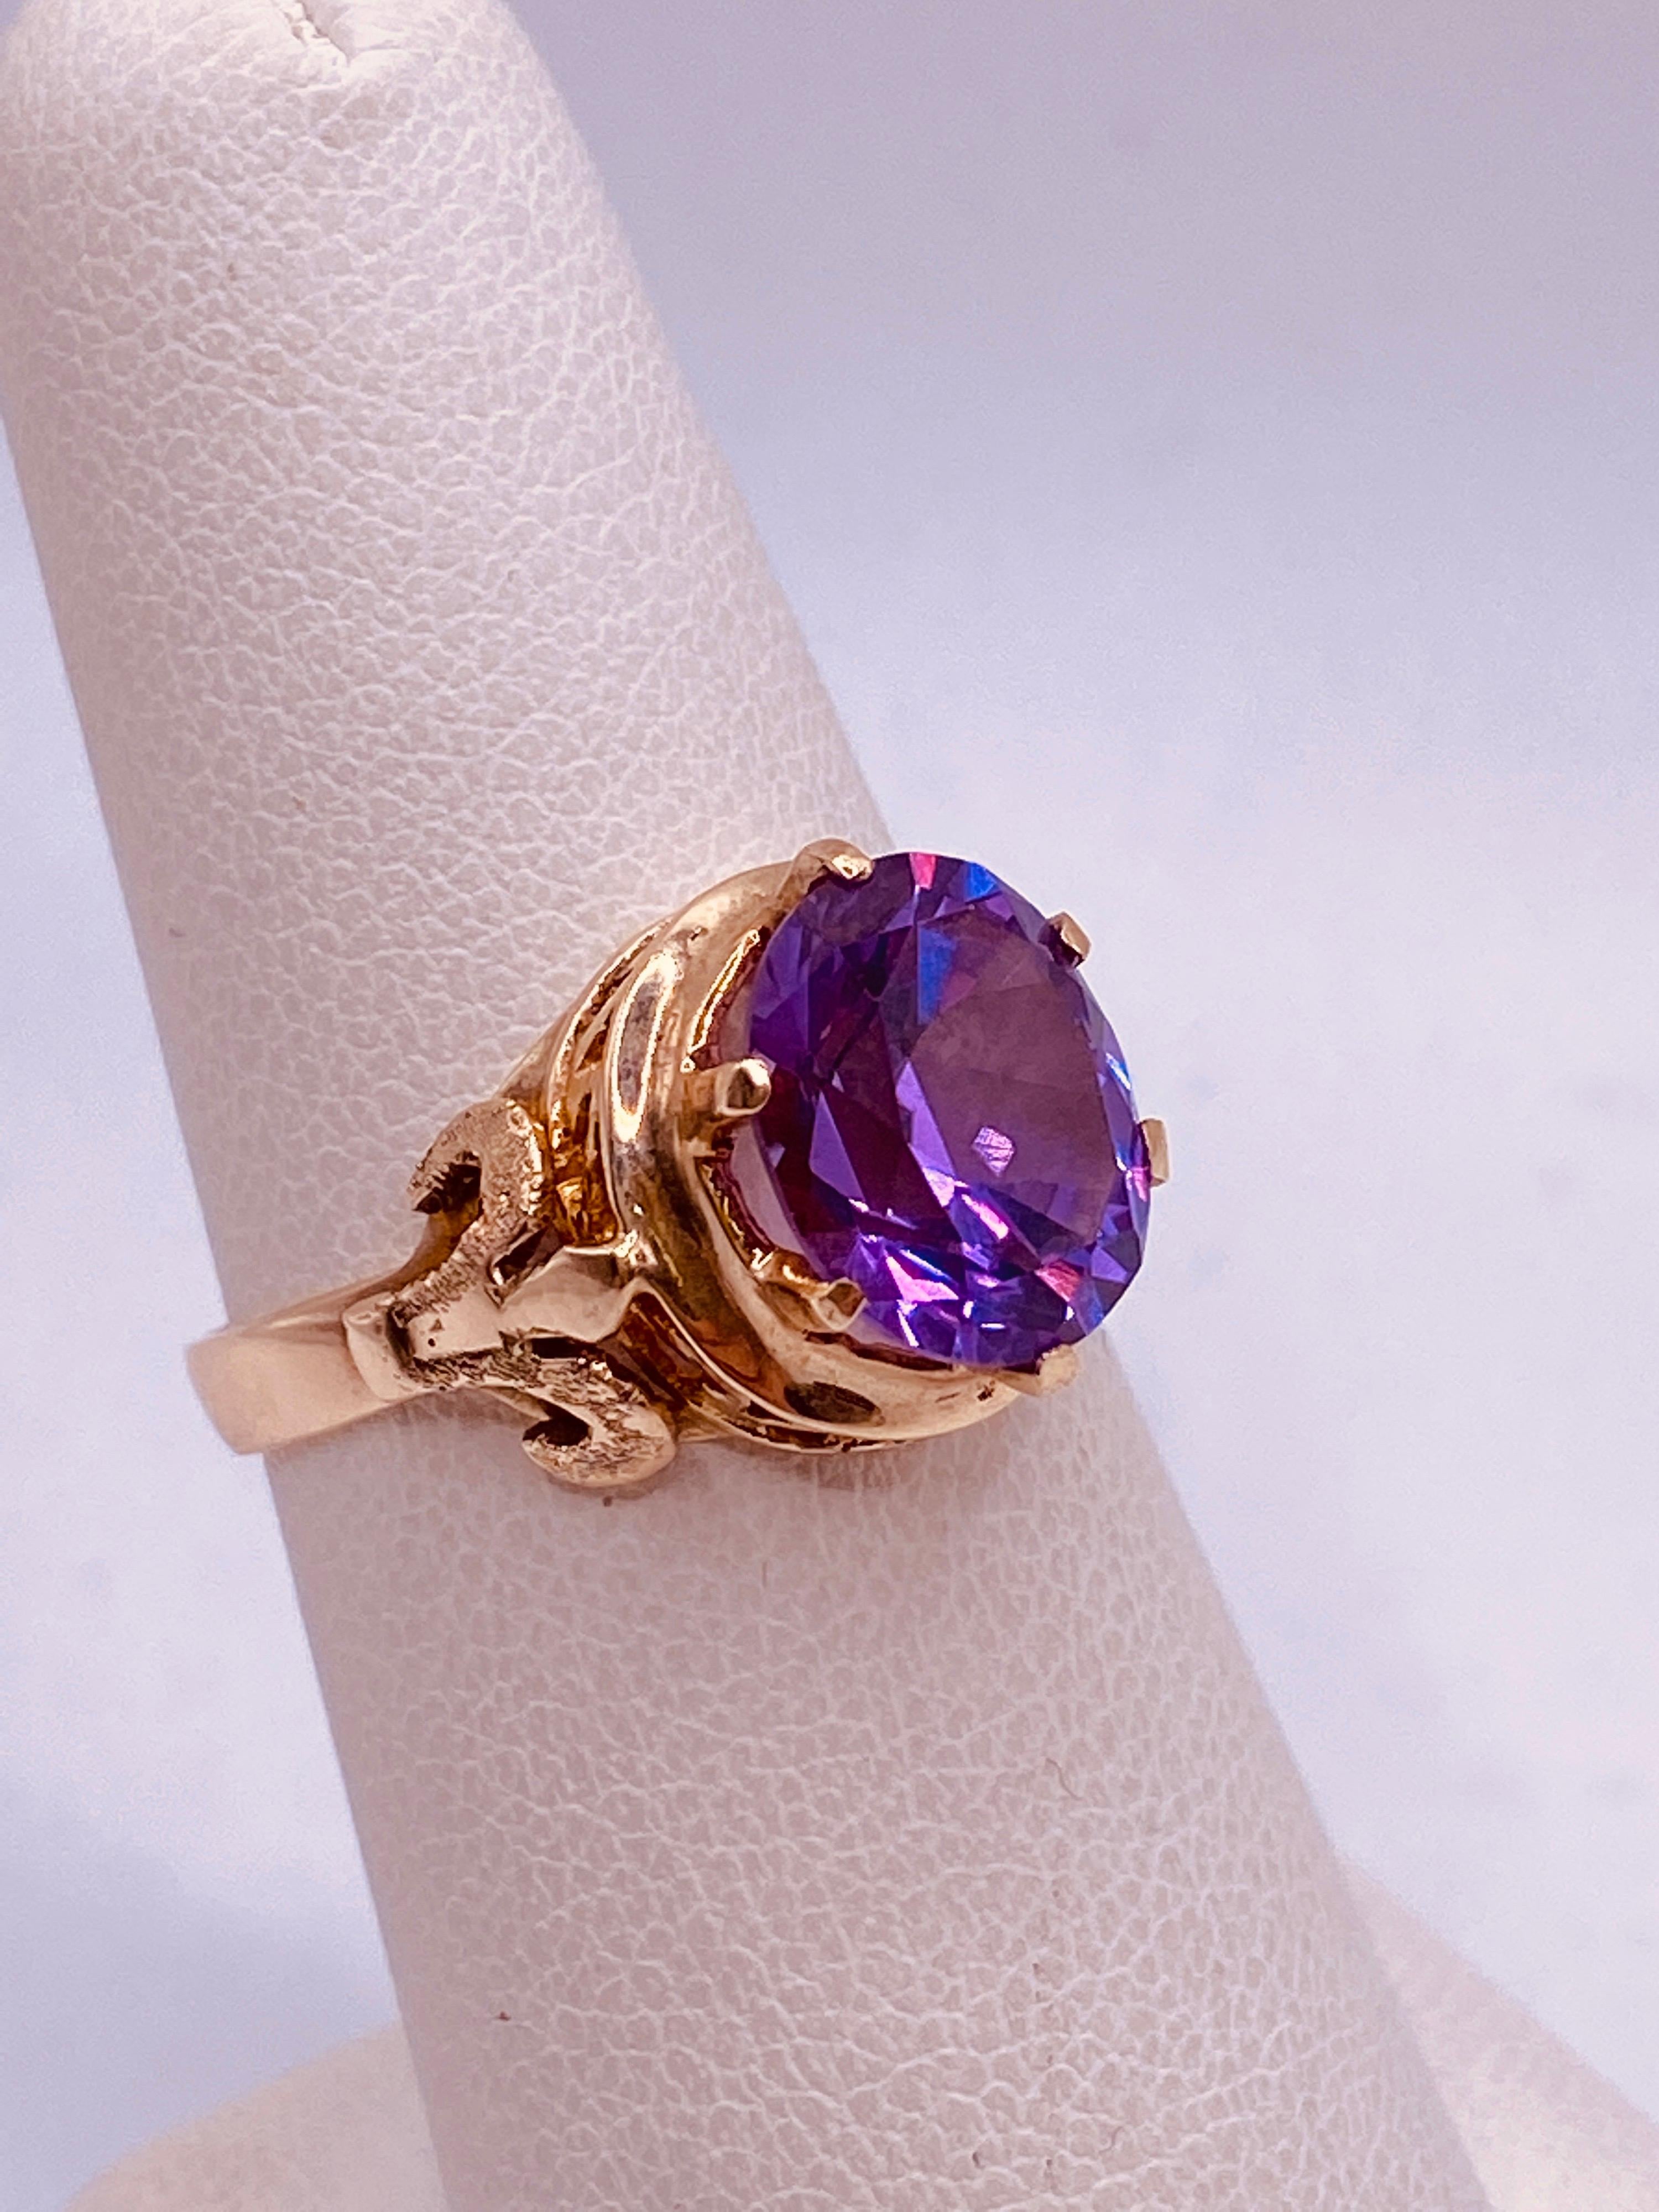 14k yellow gold Victorian style amethyst ring with fluer de lis setting. 2.0dwt. Size 7. 